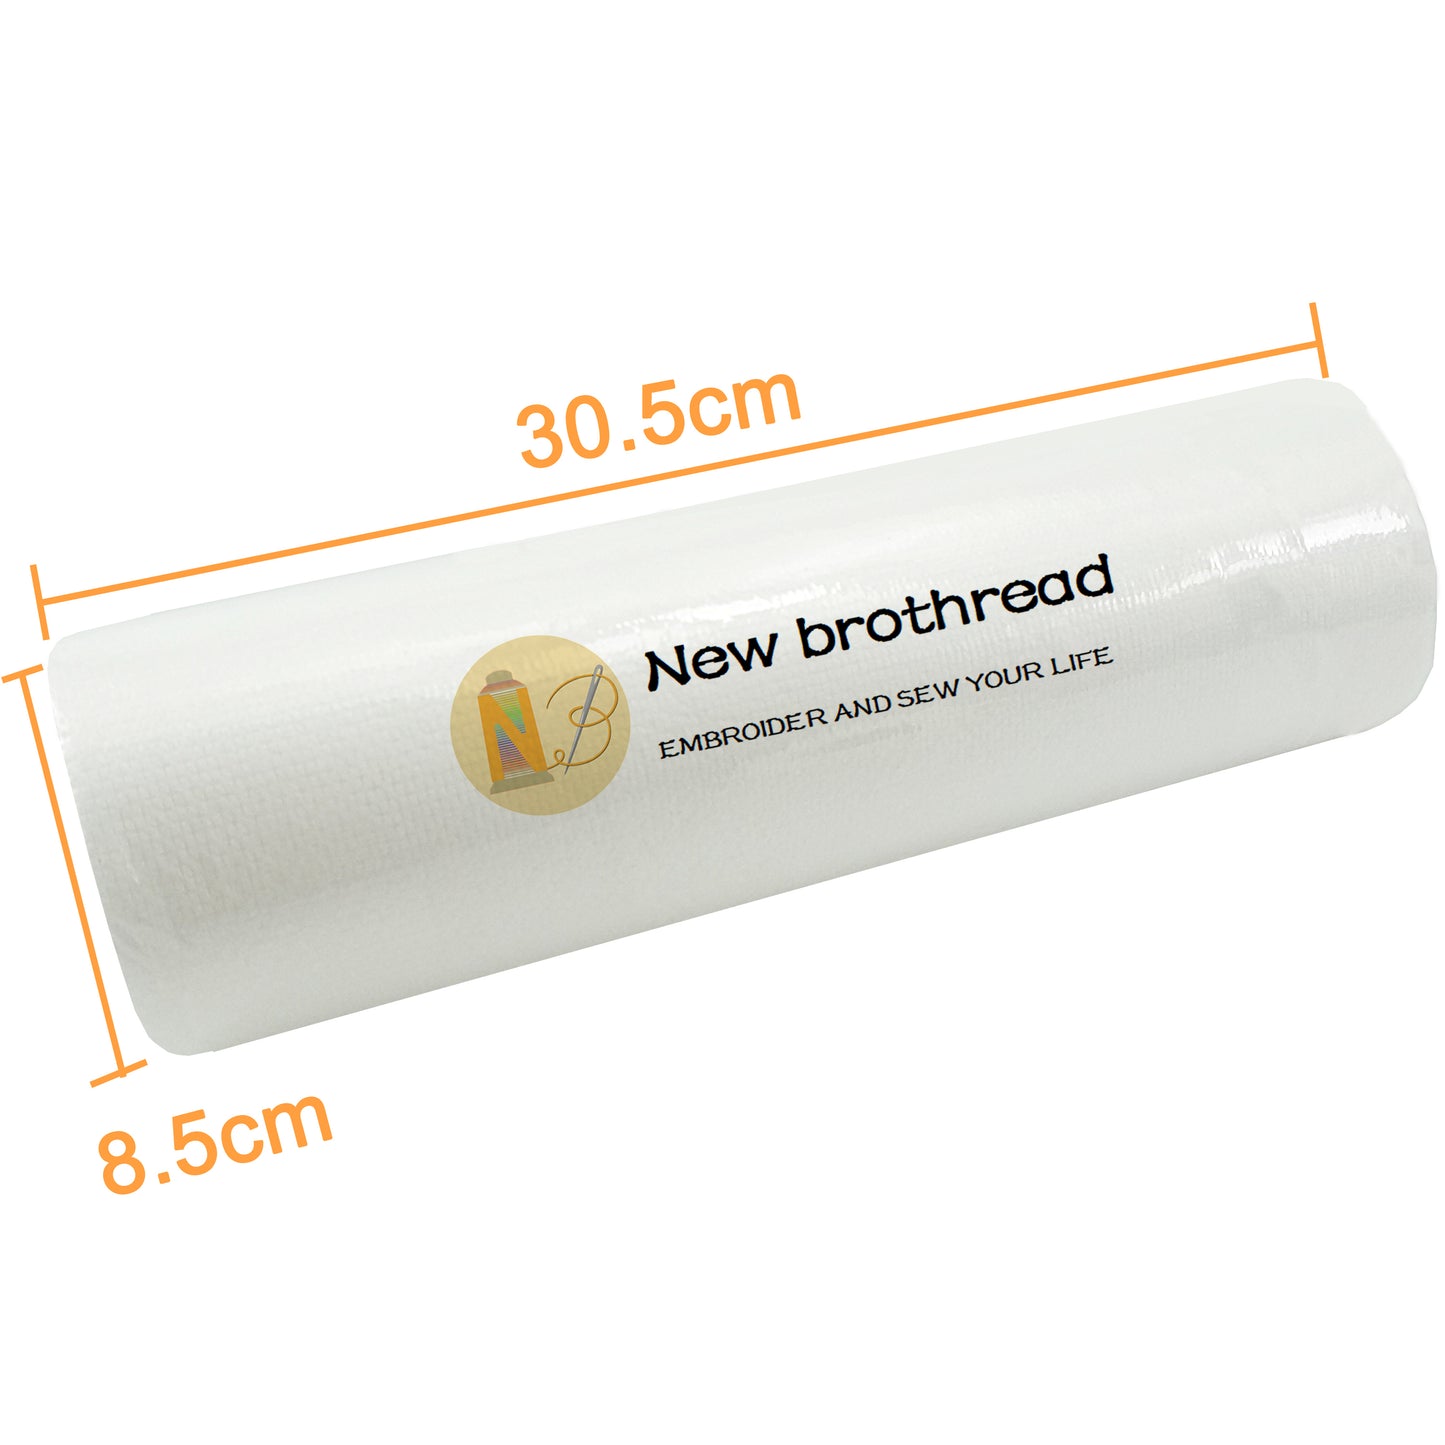 New brothread Fusible Iron on No Show Mesh Machine Embroidery Stabilizer Backing 12" x 25 Yd roll - Light Weight 1.8 oz